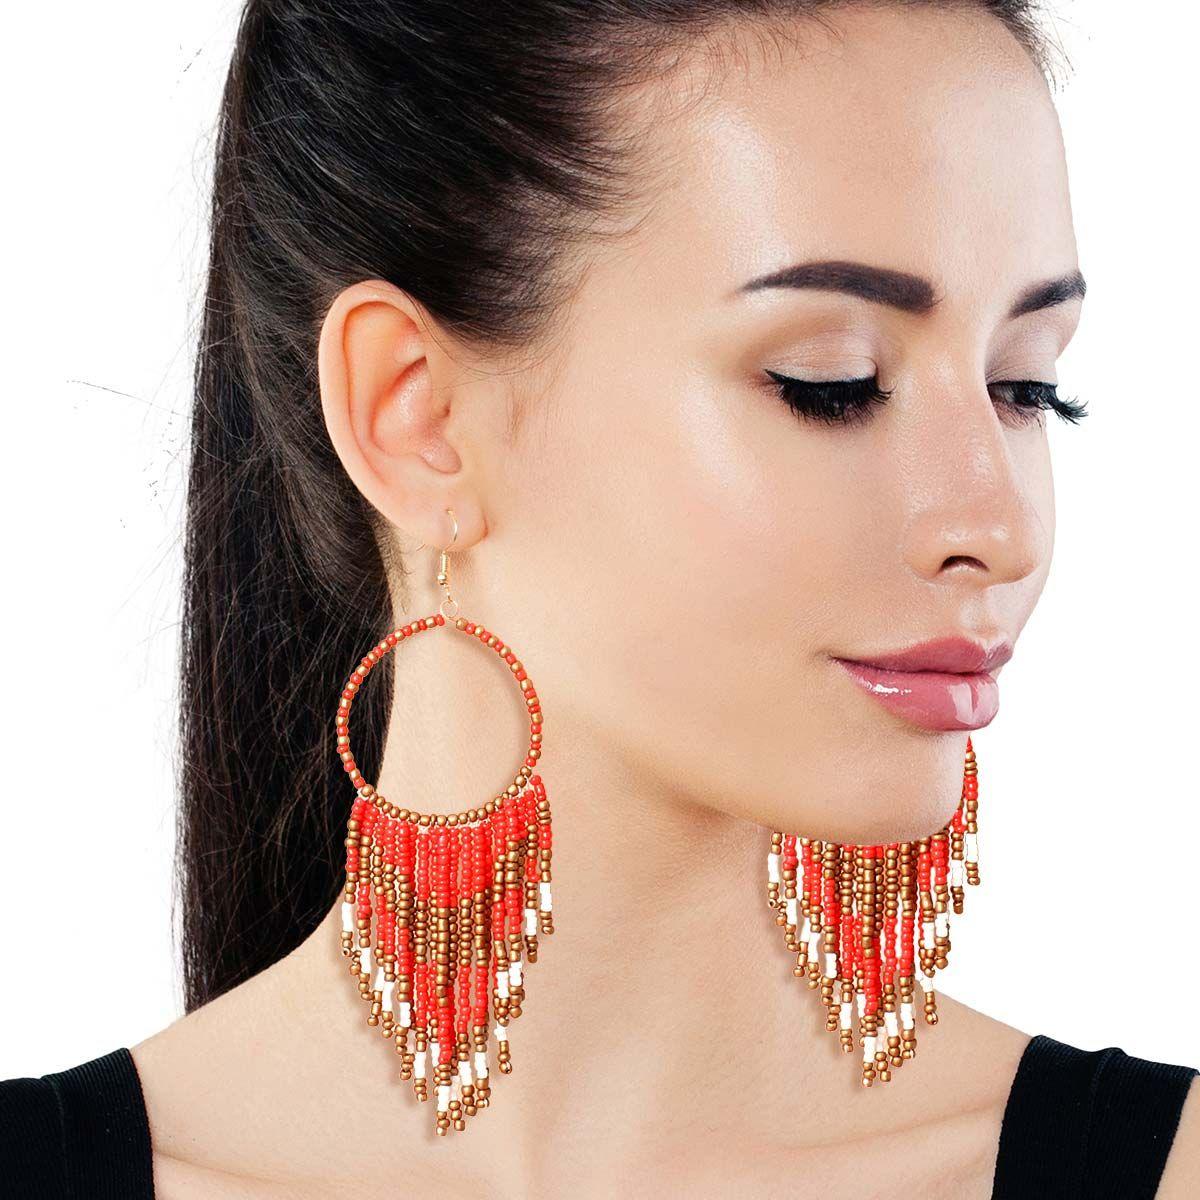 Upgrade Your Style with Stunning Red & Gold Bead Fringe Earrings